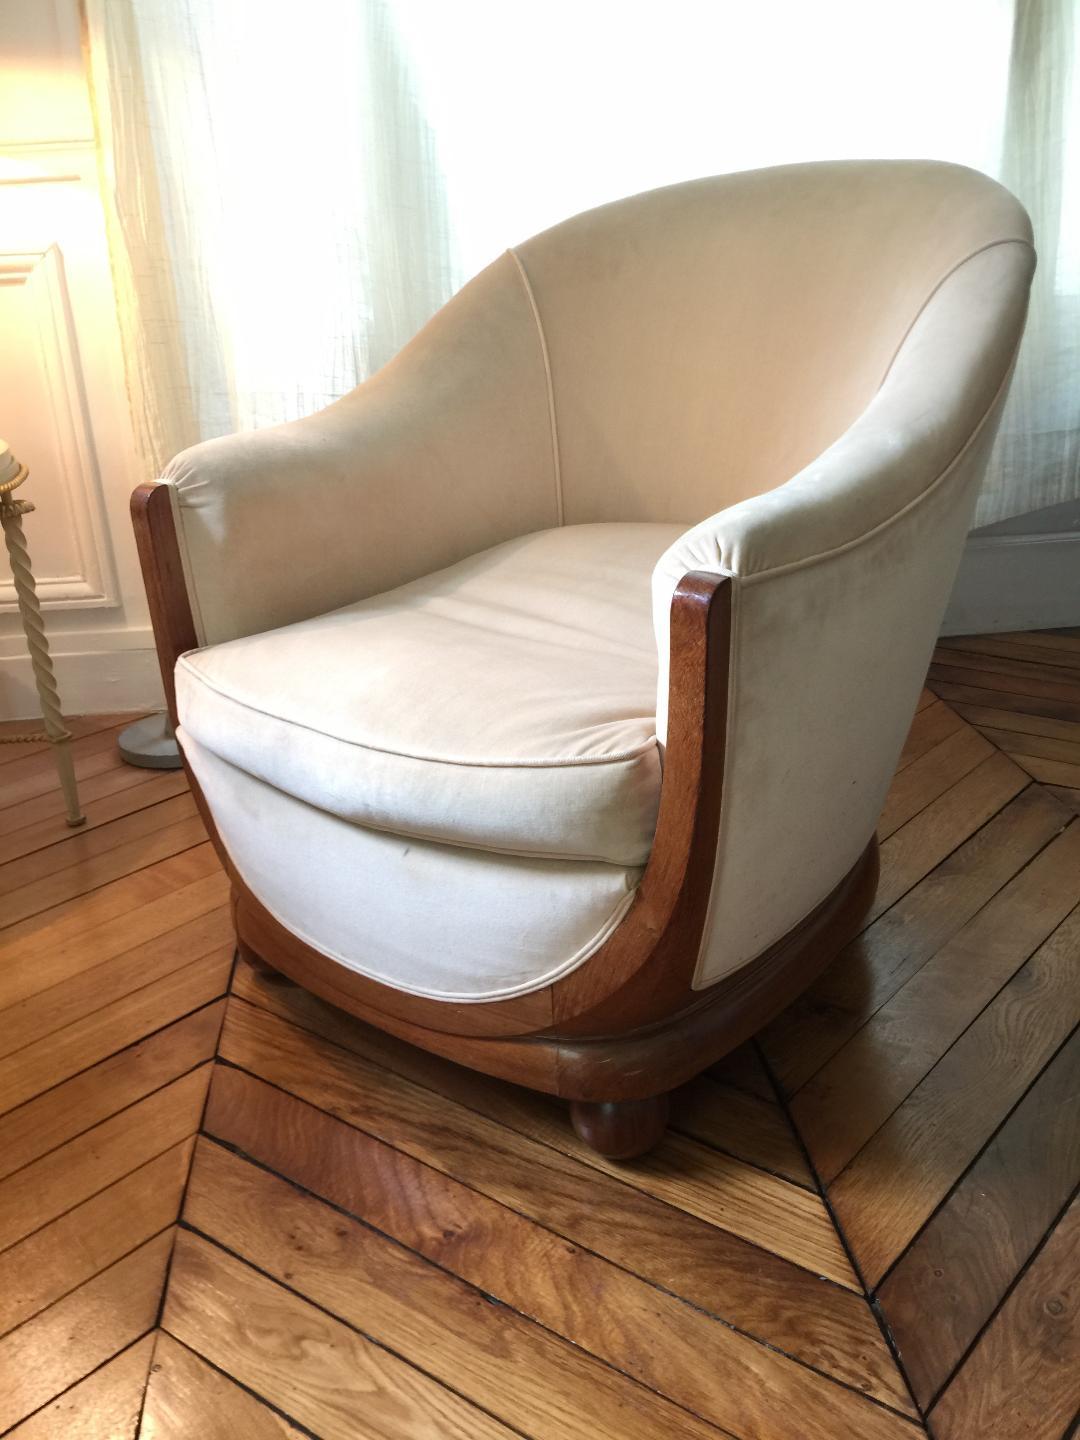 Jules Leleu (1883-1961)
A pair of gondolas armchairs in walnut veneer and structure covered with fabric. Designed by Jules Leleu in France, circa 1925.
Inclined backrest and armrests with rounded cuffs. Curved base facade uprights, circular low